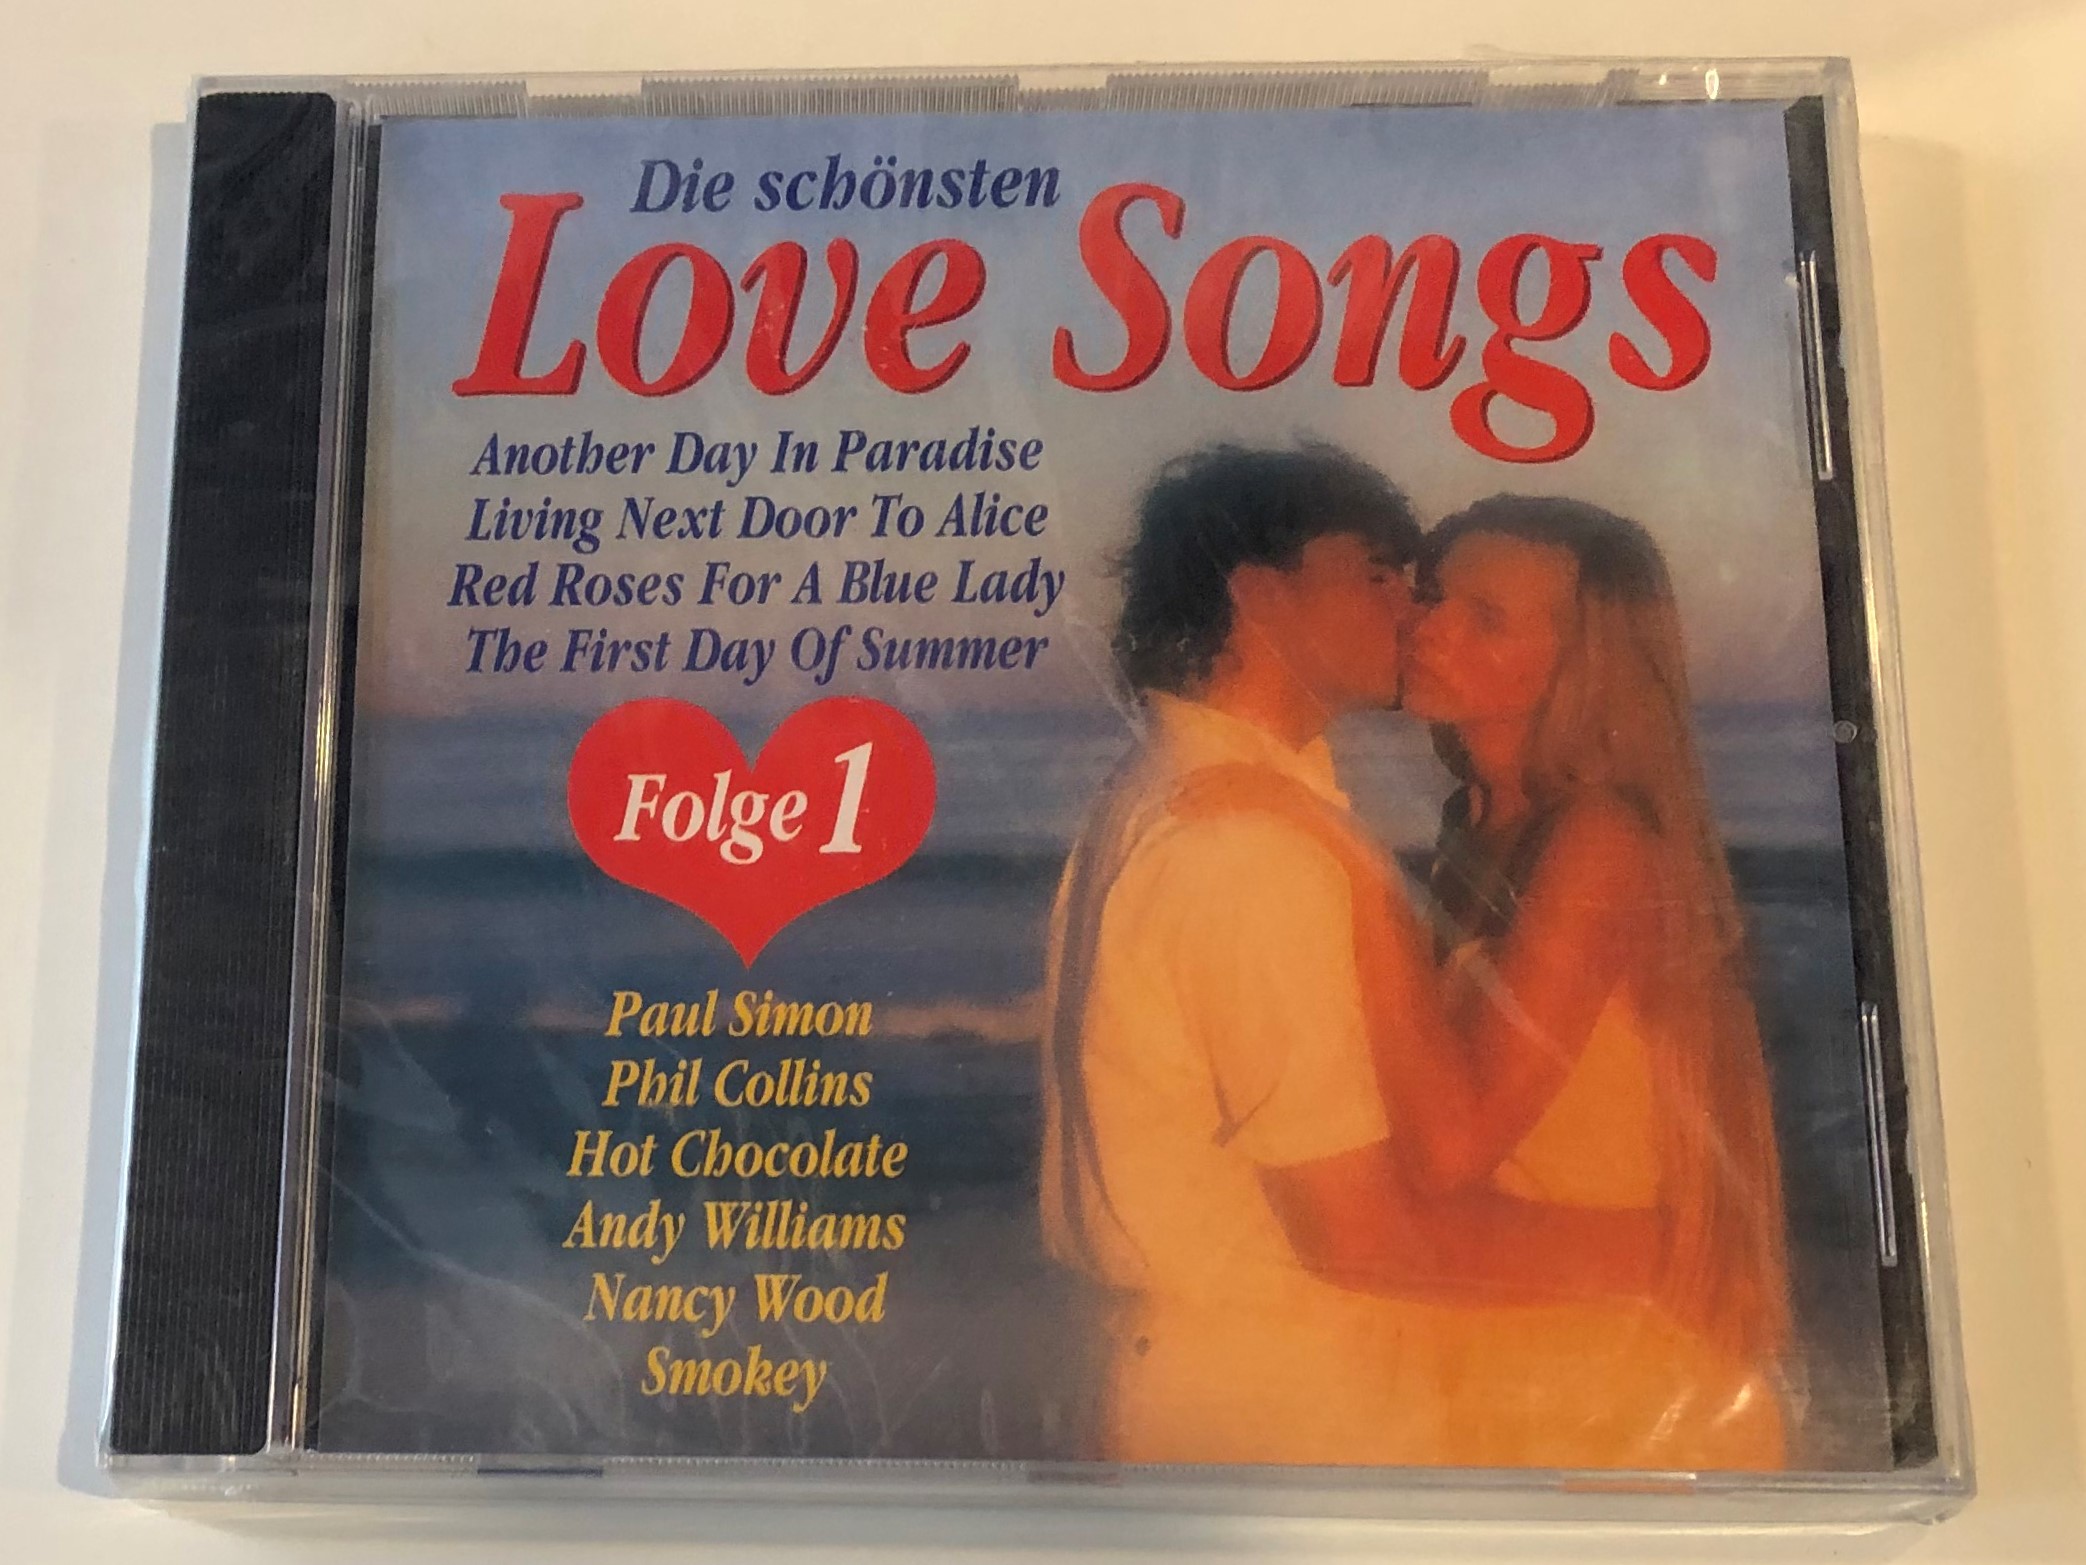 die-sch-nsten-love-songs-folge-1-another-day-in-paradise-living-next-door-to-alice-red-roses-for-a-blue-lady-the-first-day-of-summer-paul-simon-phil-collins-hot-chocolate-andy-williams-1-.jpg